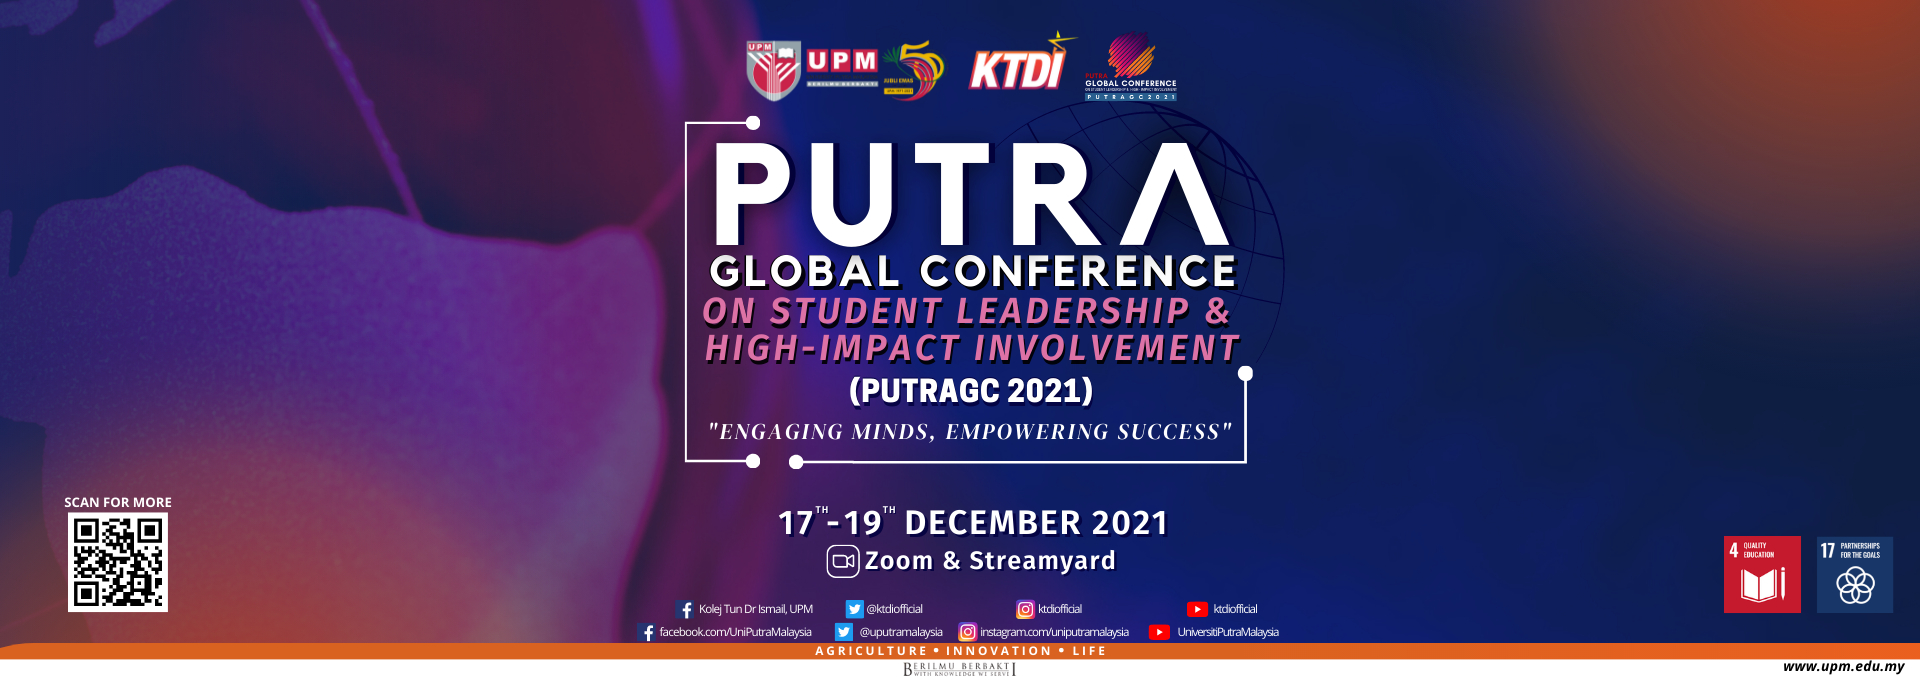 PUTRA GLOBAL CONFERENCE